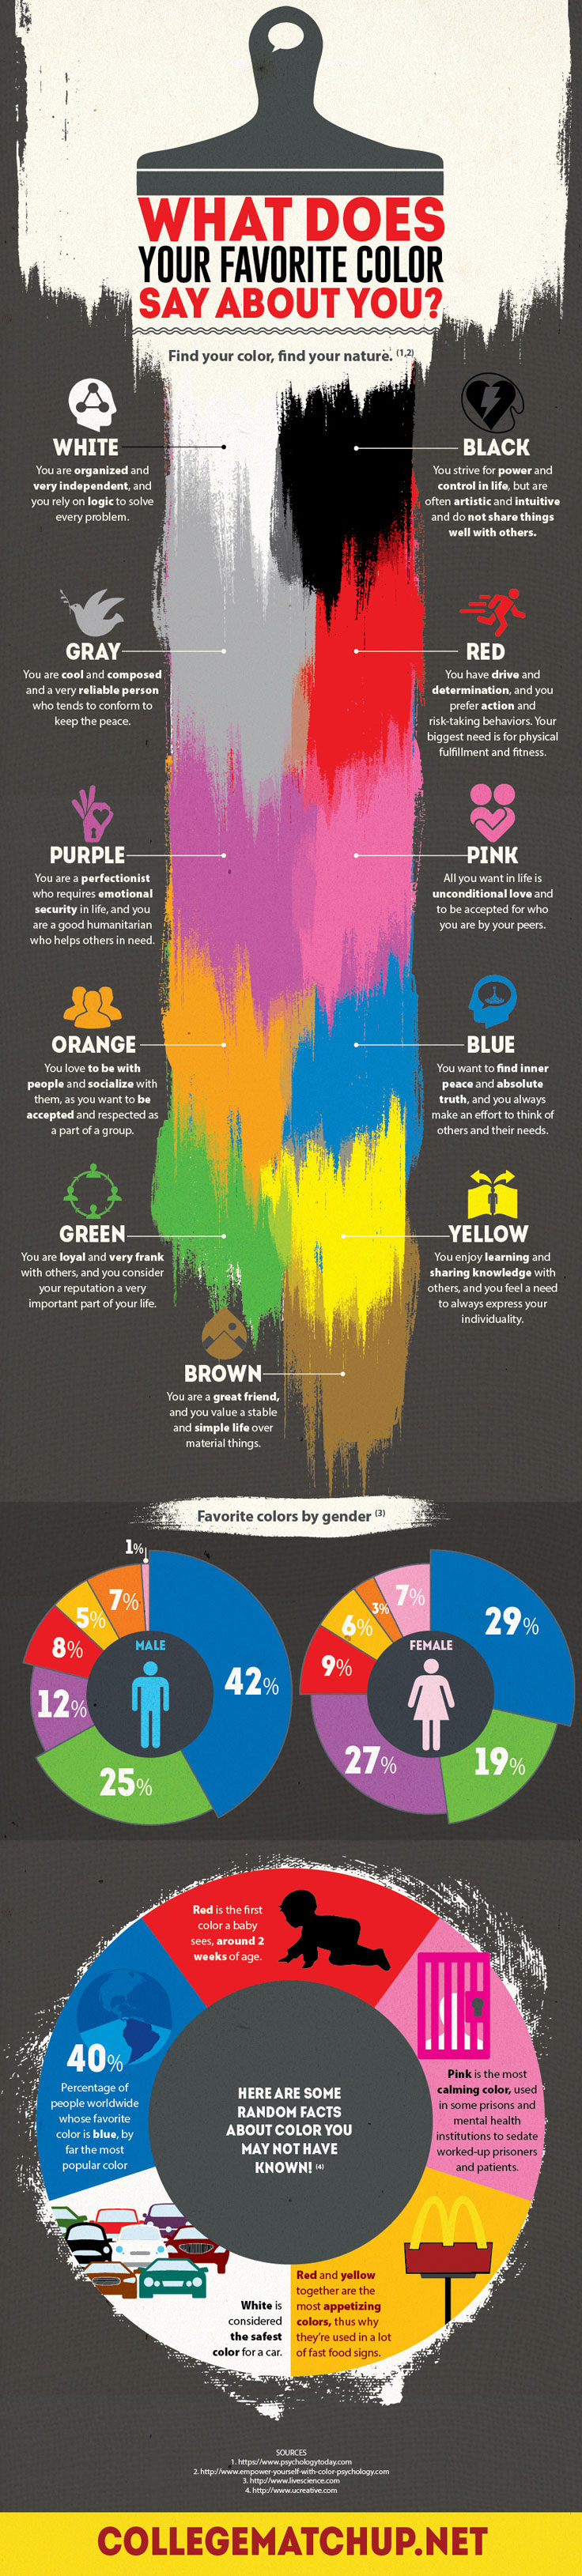 Got a favorite color? Well, what does your favorite color say about you? Check this artistic infographic for answers and fascinating color facts.